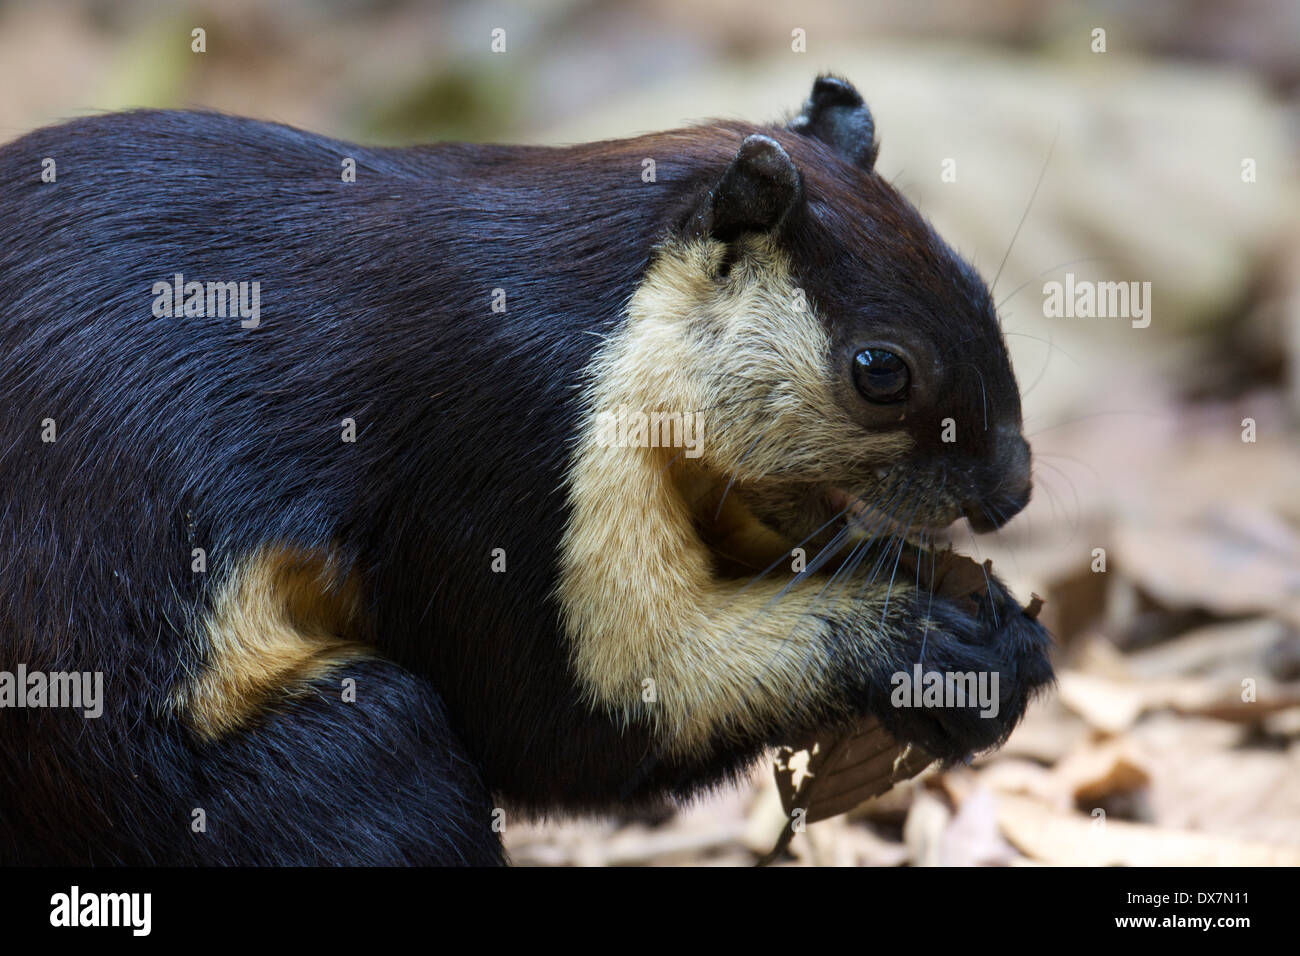 The black giant squirrel (or Malayan giant squirrel) (Ratufa bicolor) i Stock Photo